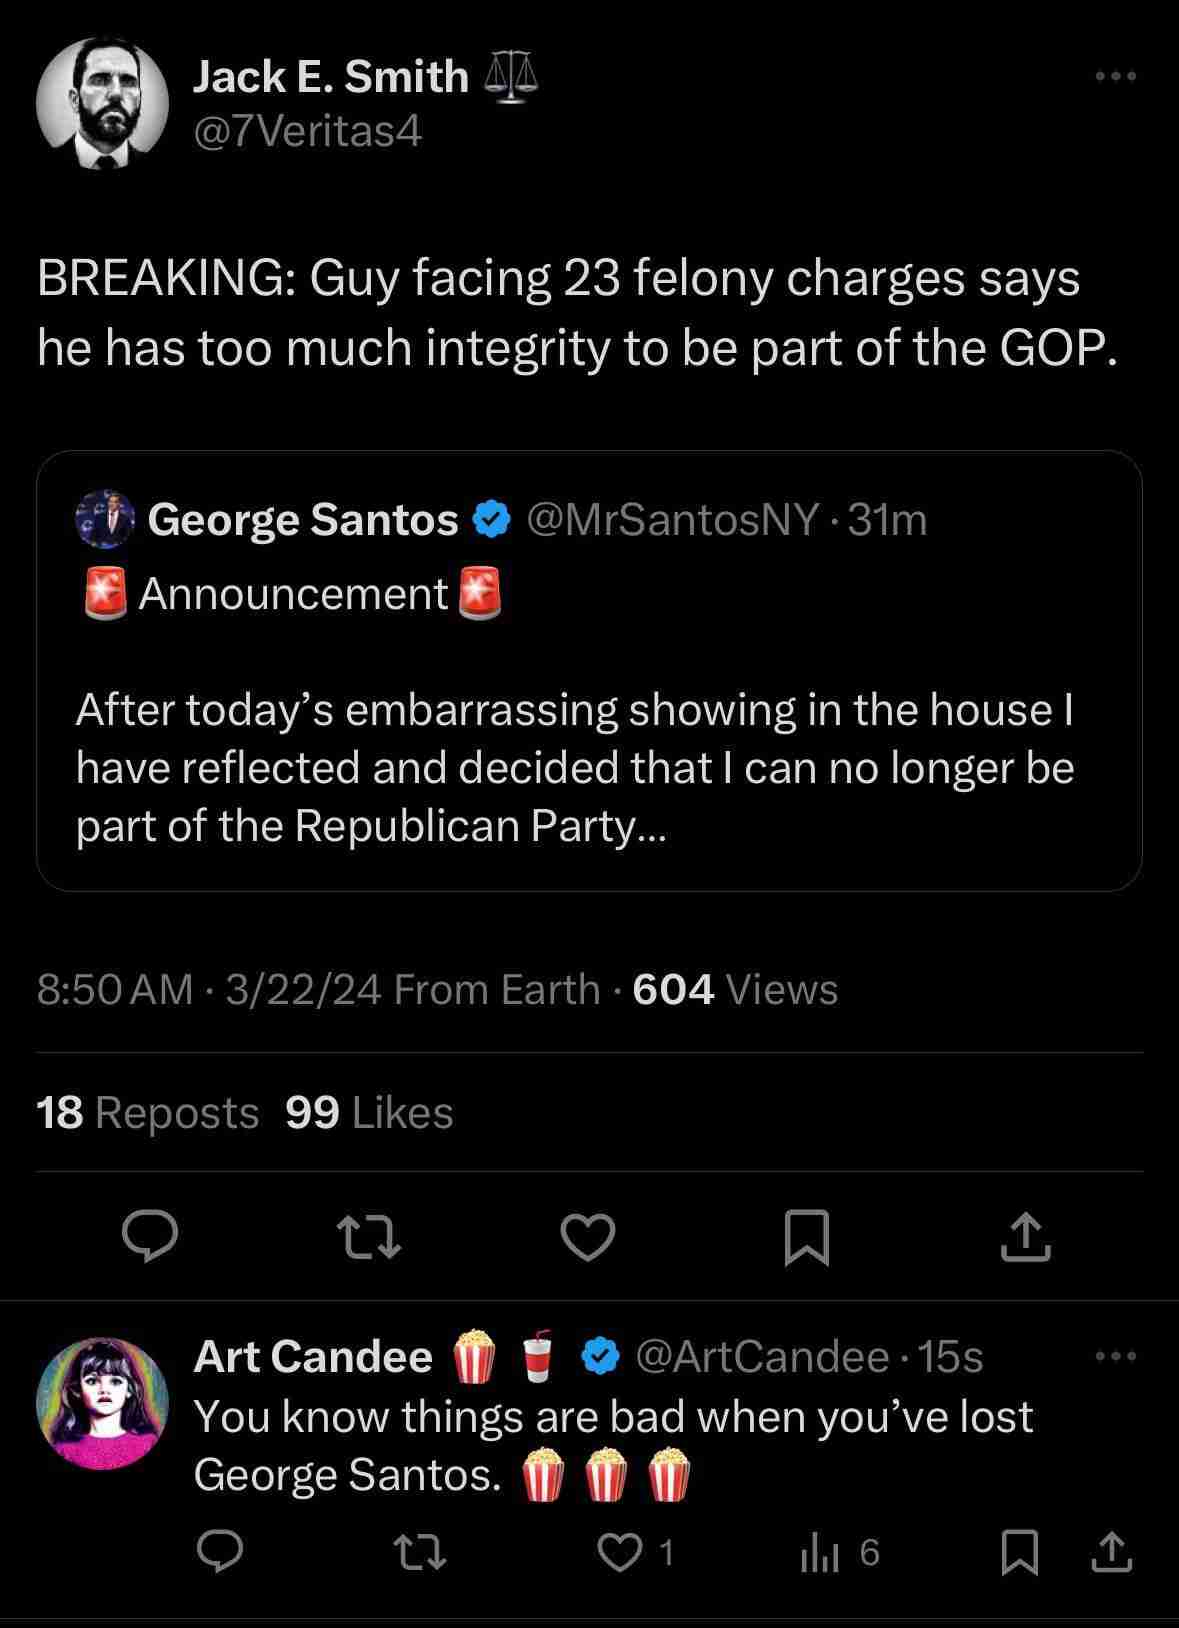 You know things are bad when you’ve lost George Santos